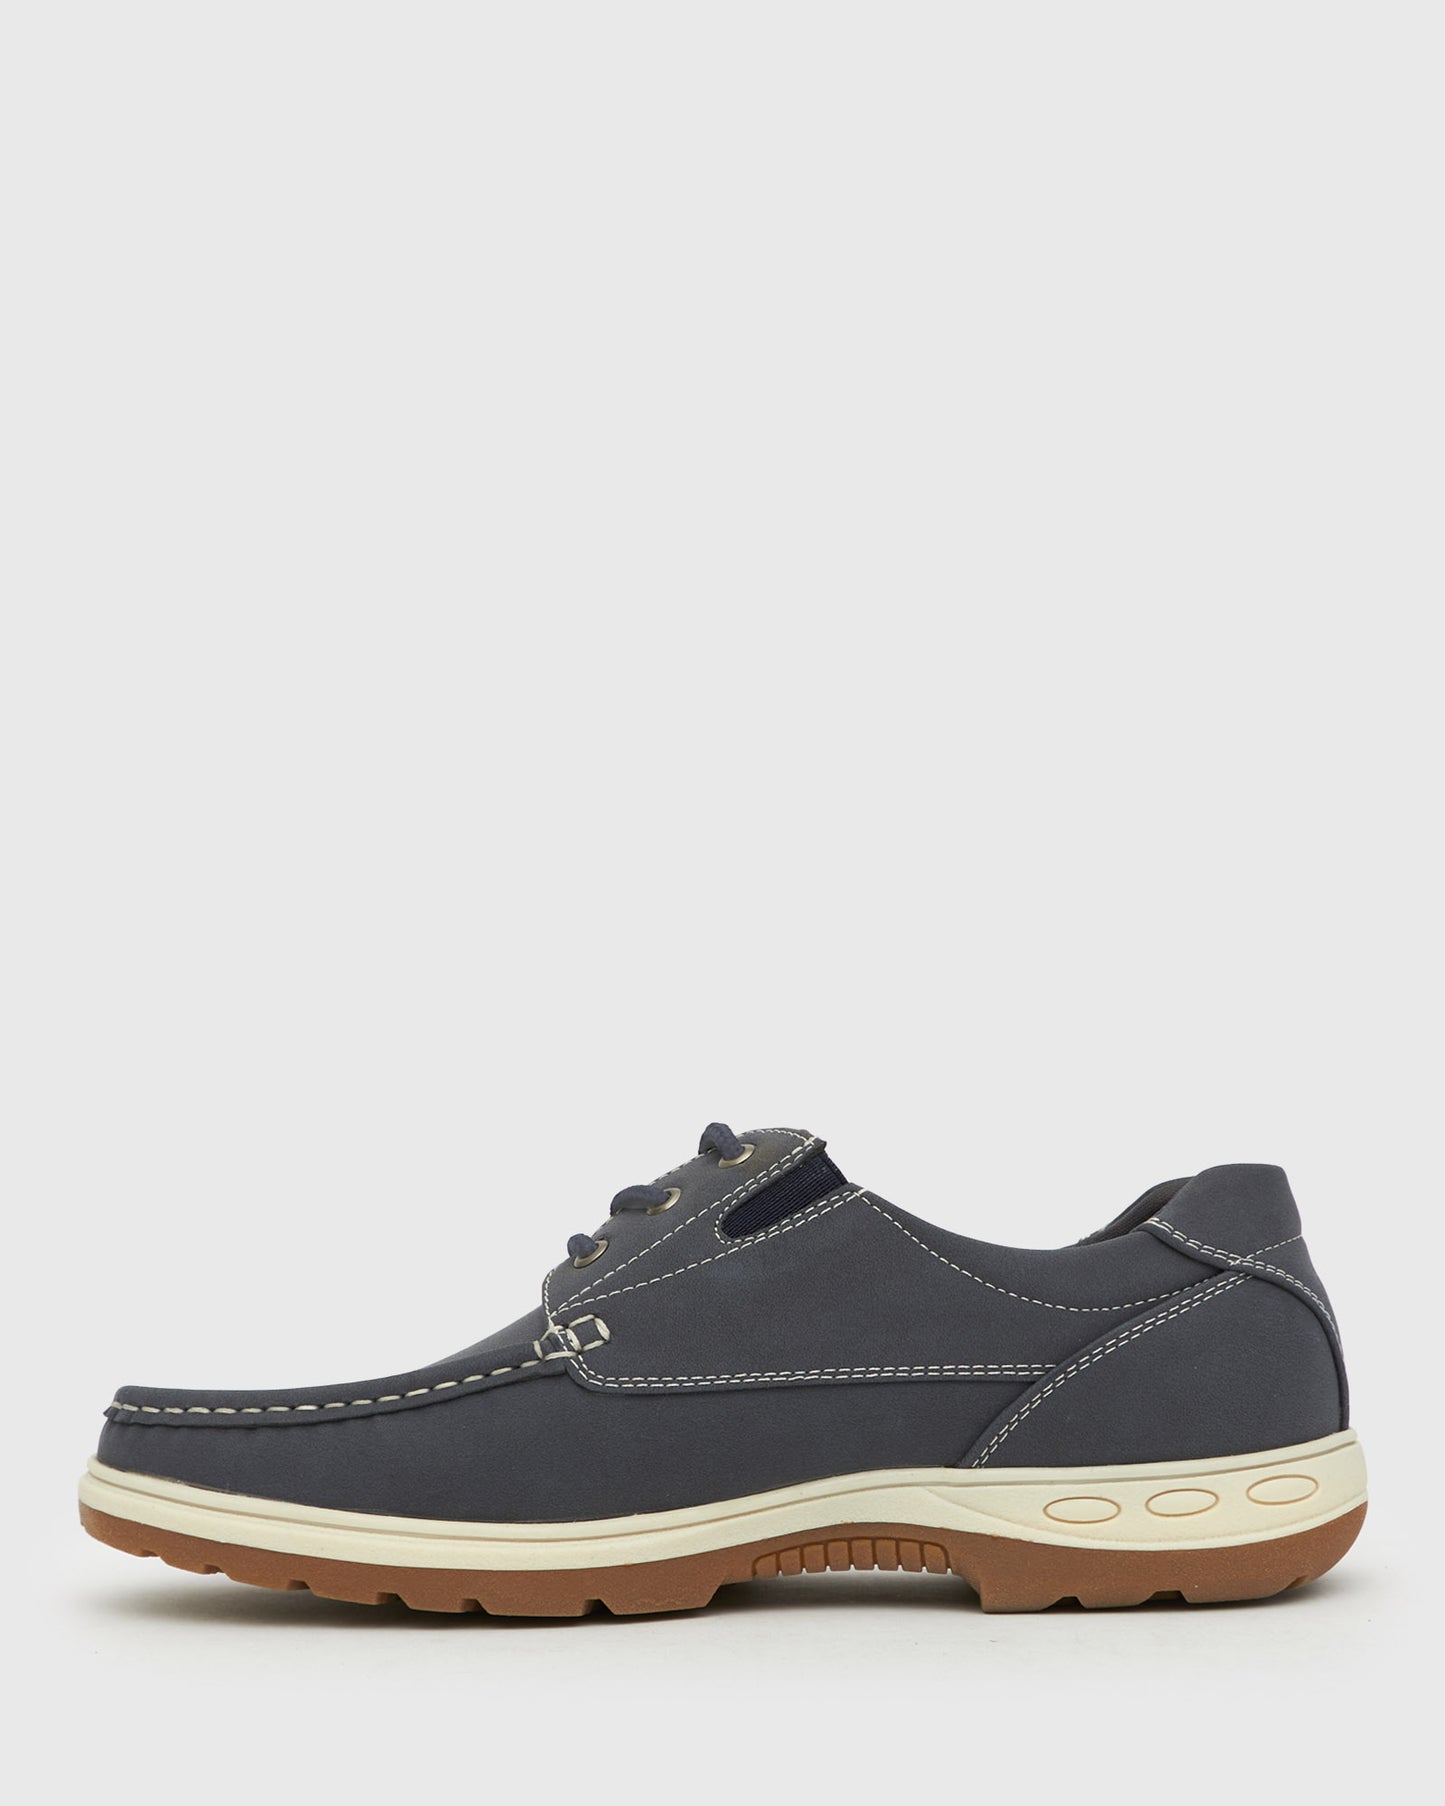 GEORGE Lace Up Boat Shoes